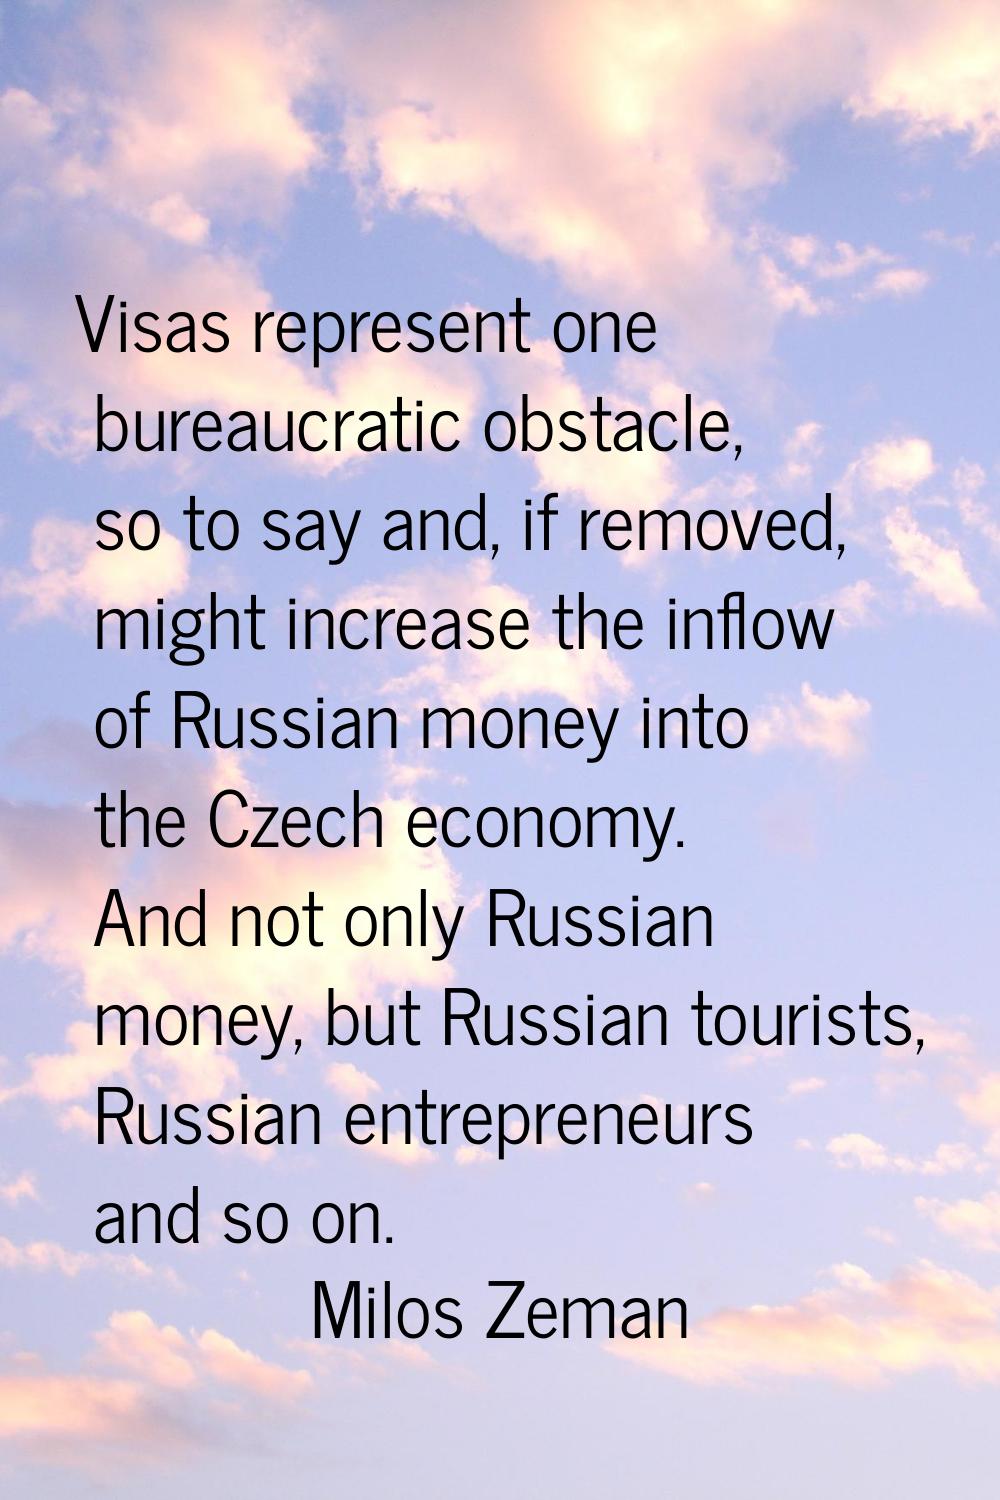 Visas represent one bureaucratic obstacle, so to say and, if removed, might increase the inflow of 